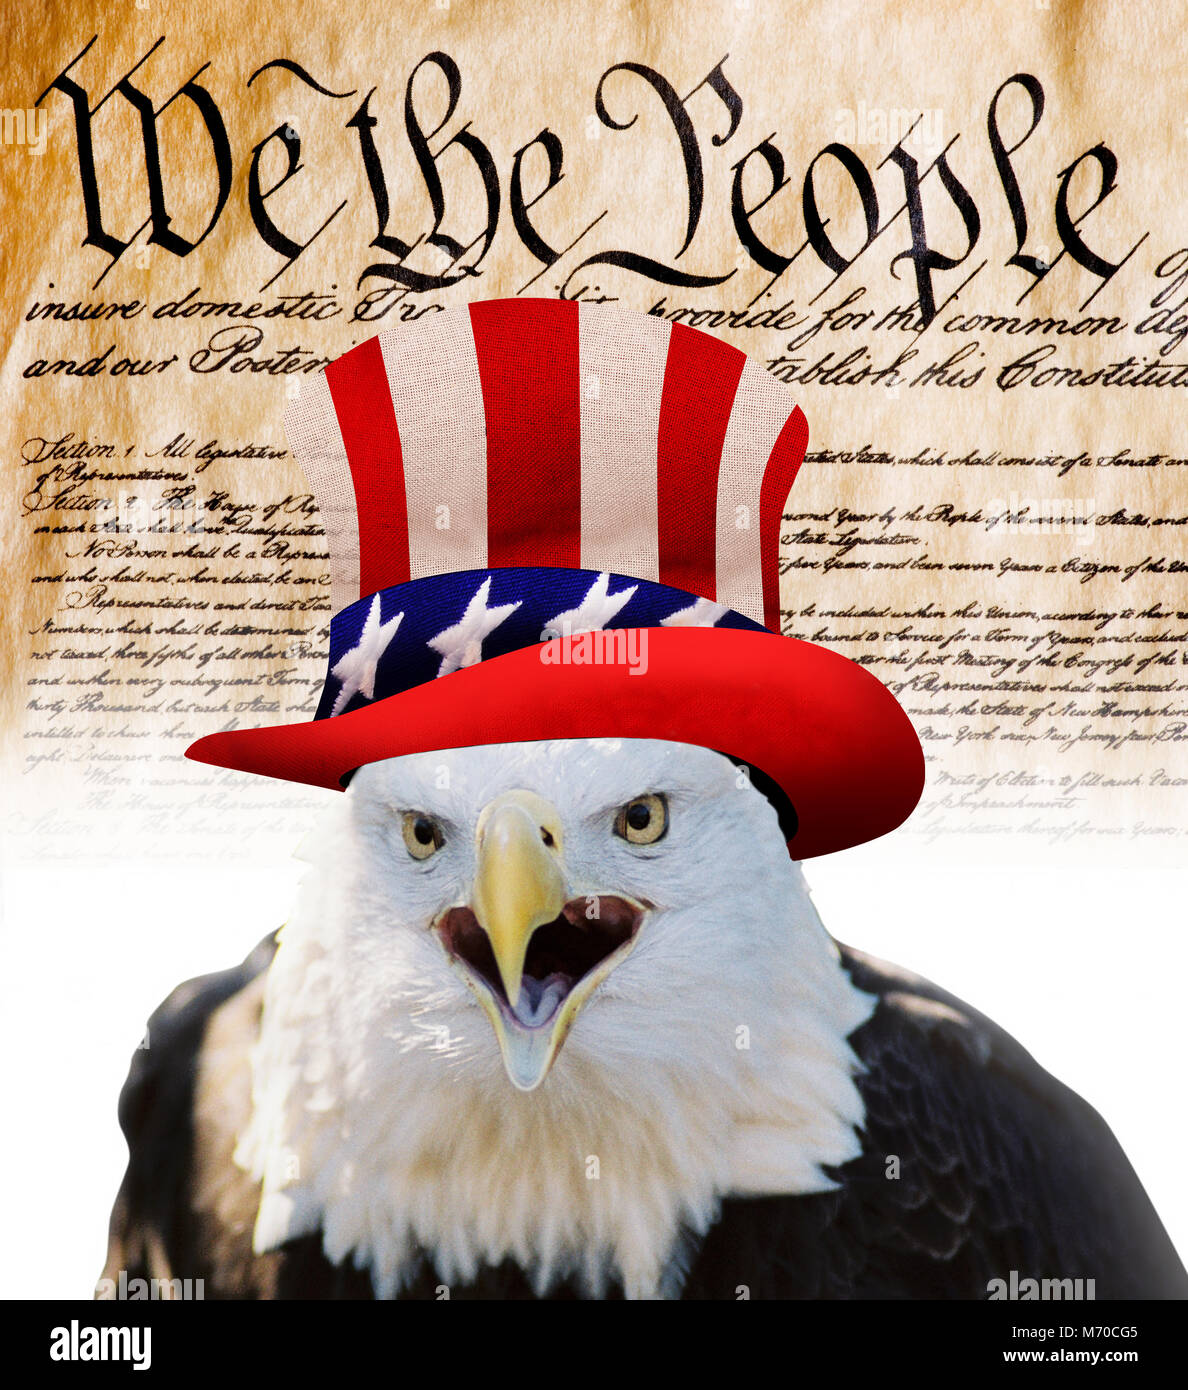 Constitution of America, We the People with American bald eagle. Stock Photo